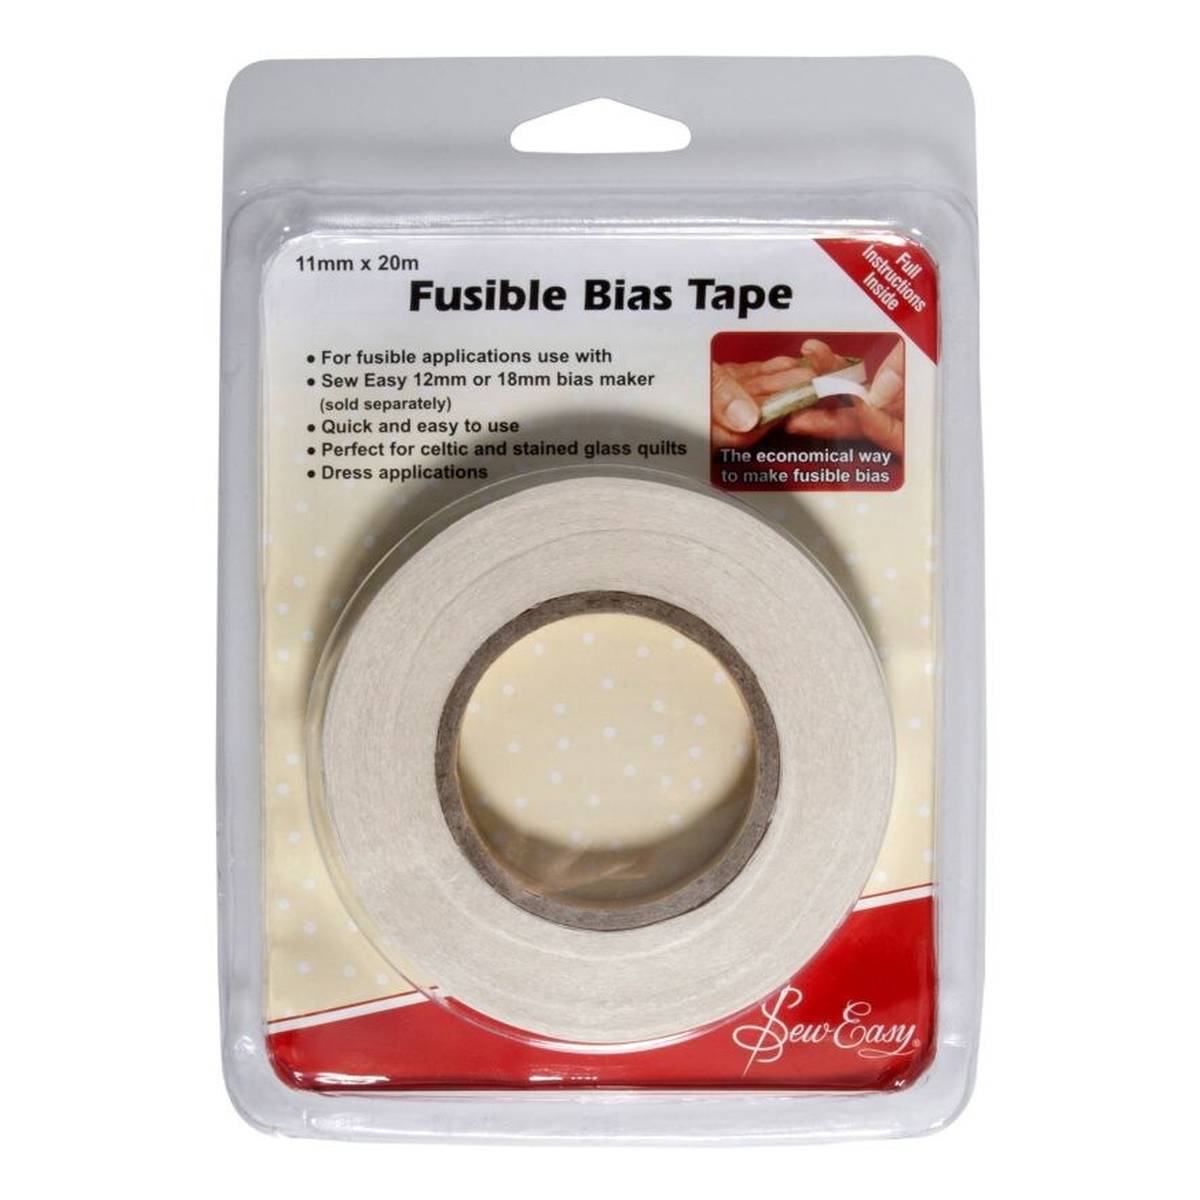 Sew Easy Fusible Tape 5/11 Mm for Use With Bias Tape Maker. Make